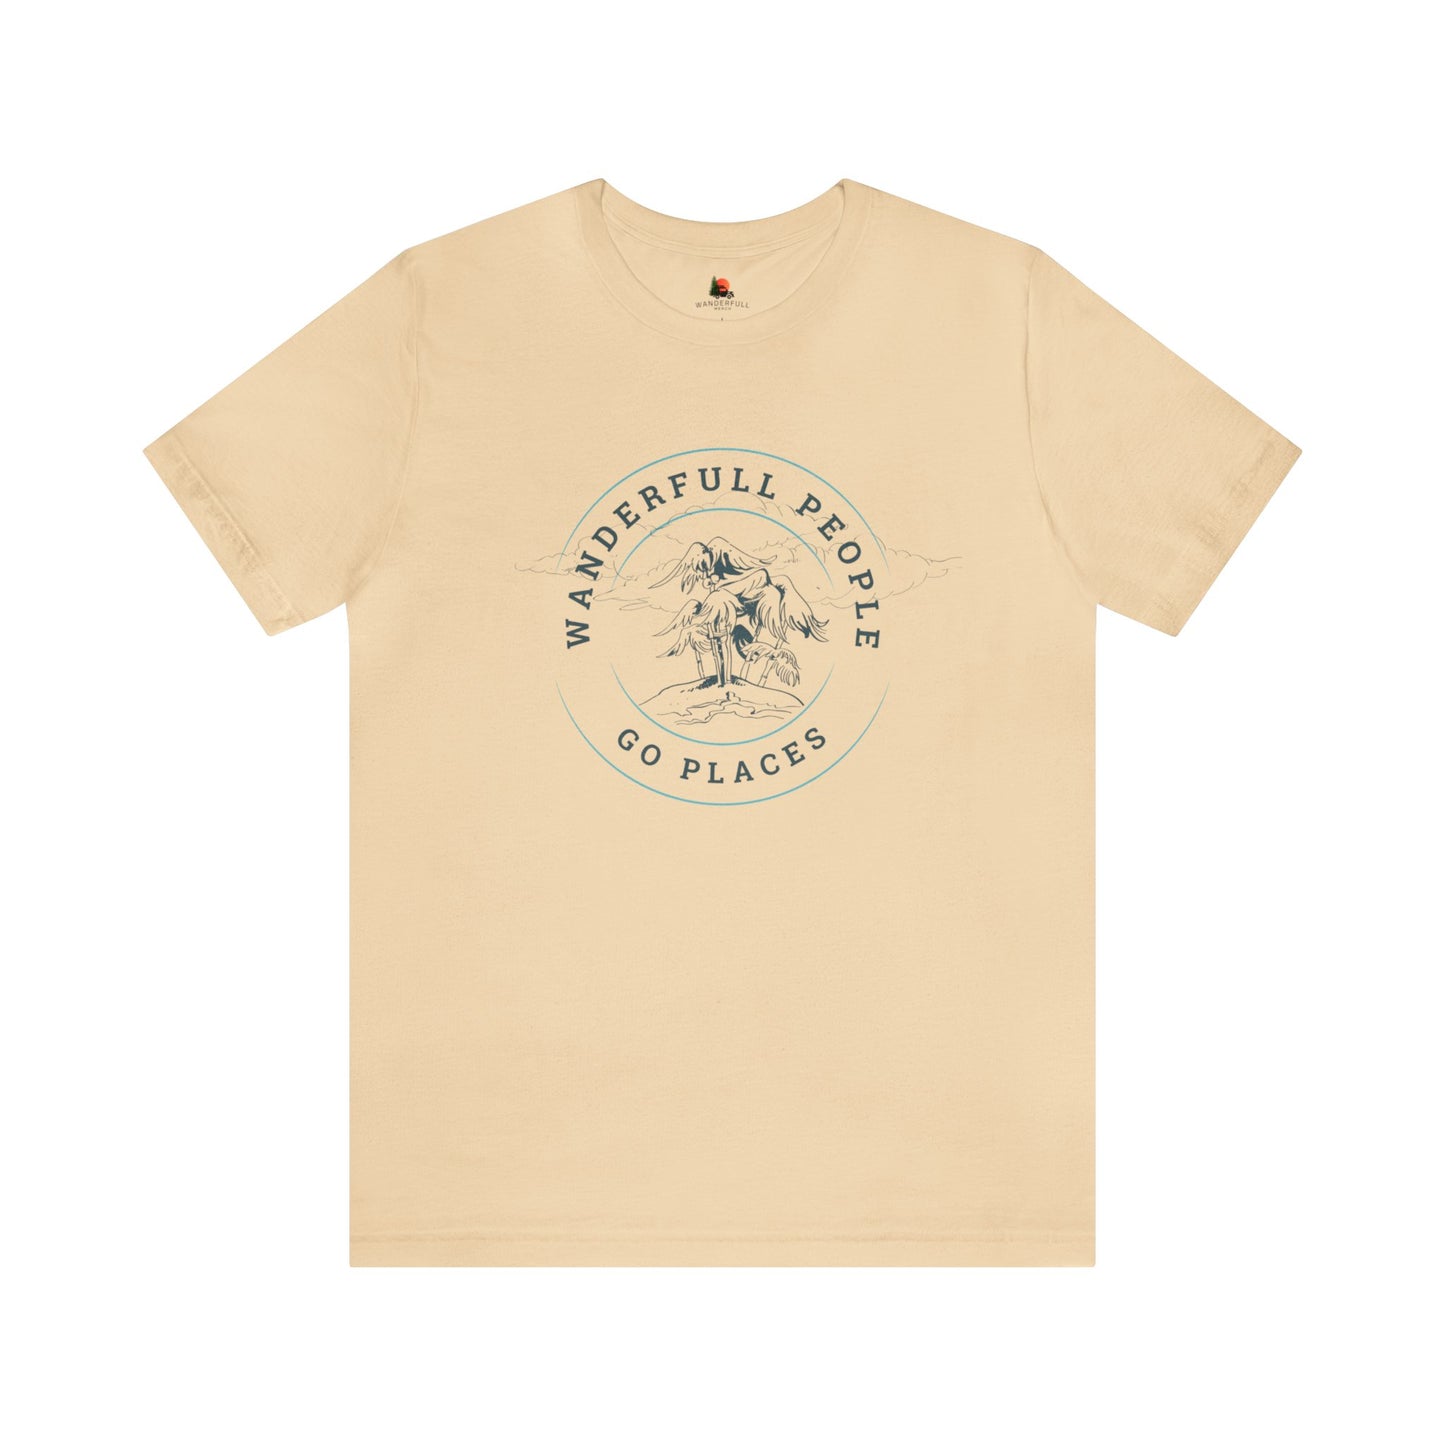 Go Places Tee